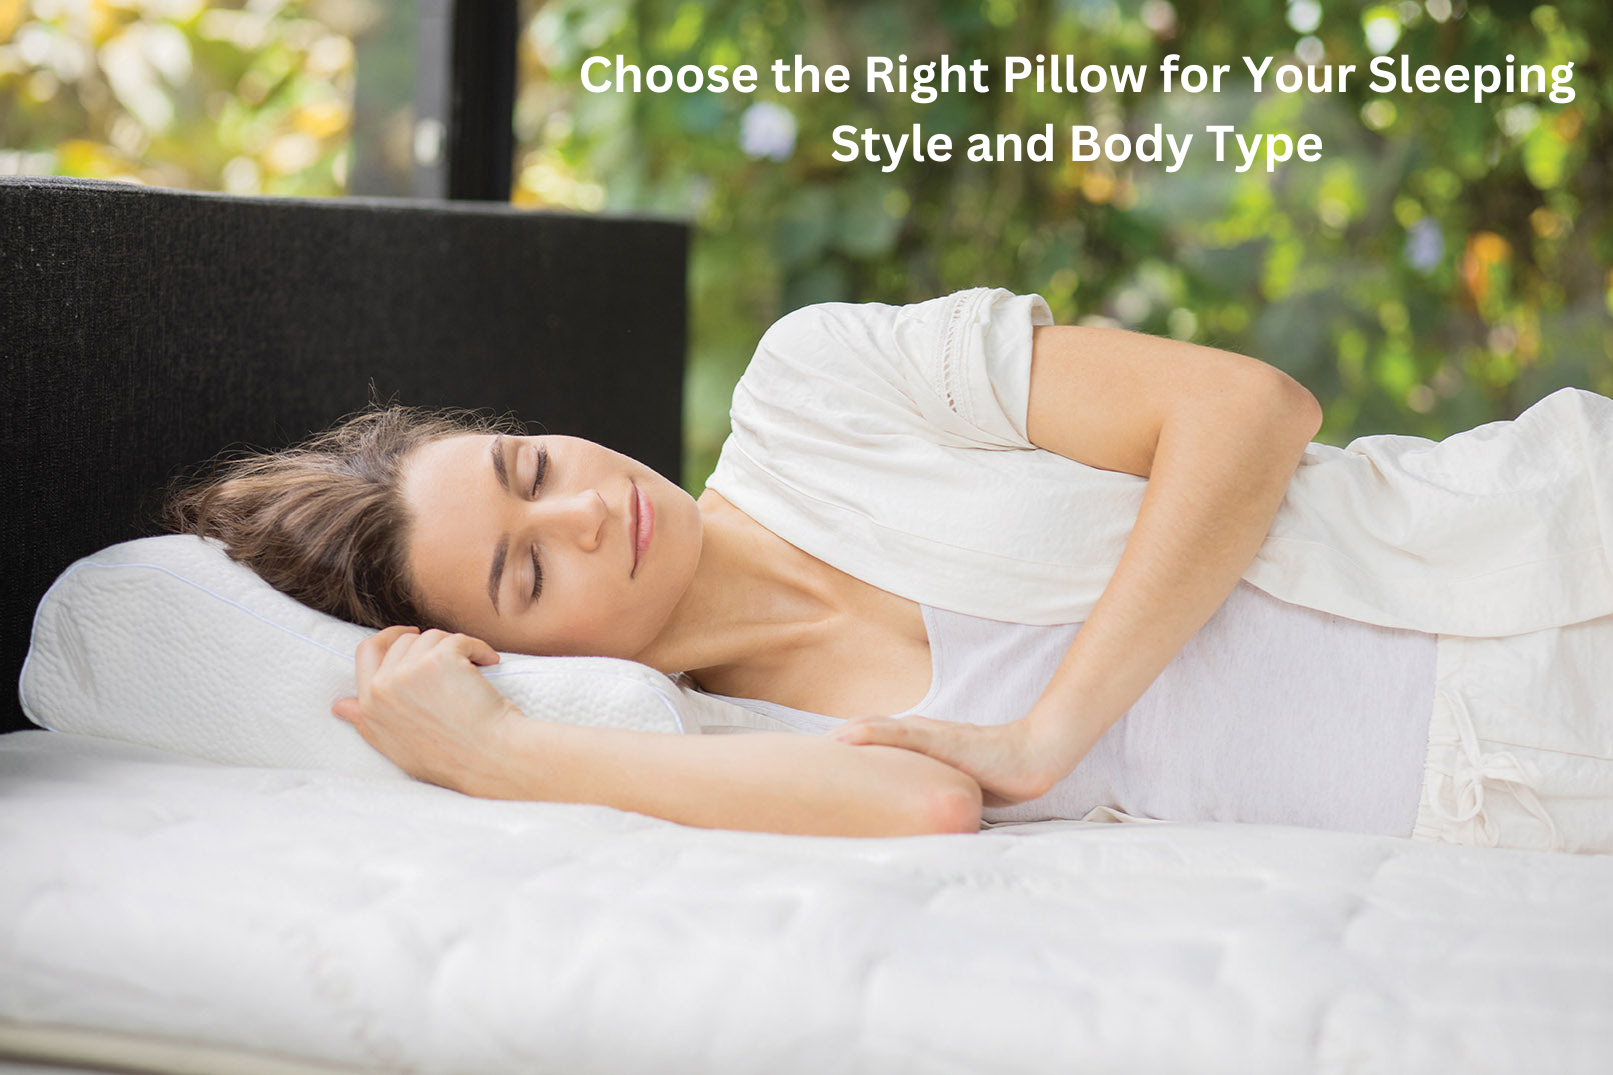 How to Choose the Right Pillow for Your Sleeping Style and Body Type